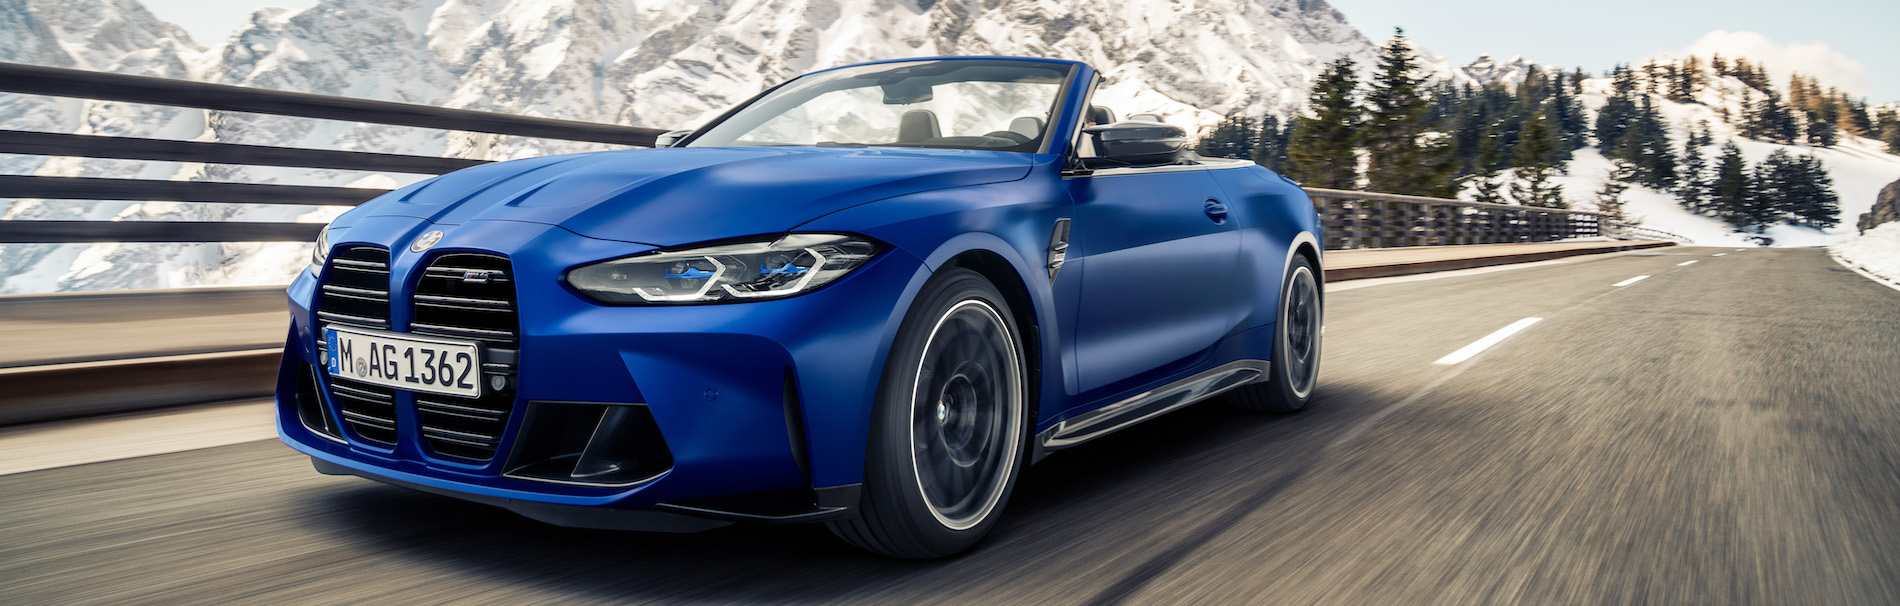 Introducing The 2022 Bmw M4 Convertible G83 Bmw M3 G80 G82